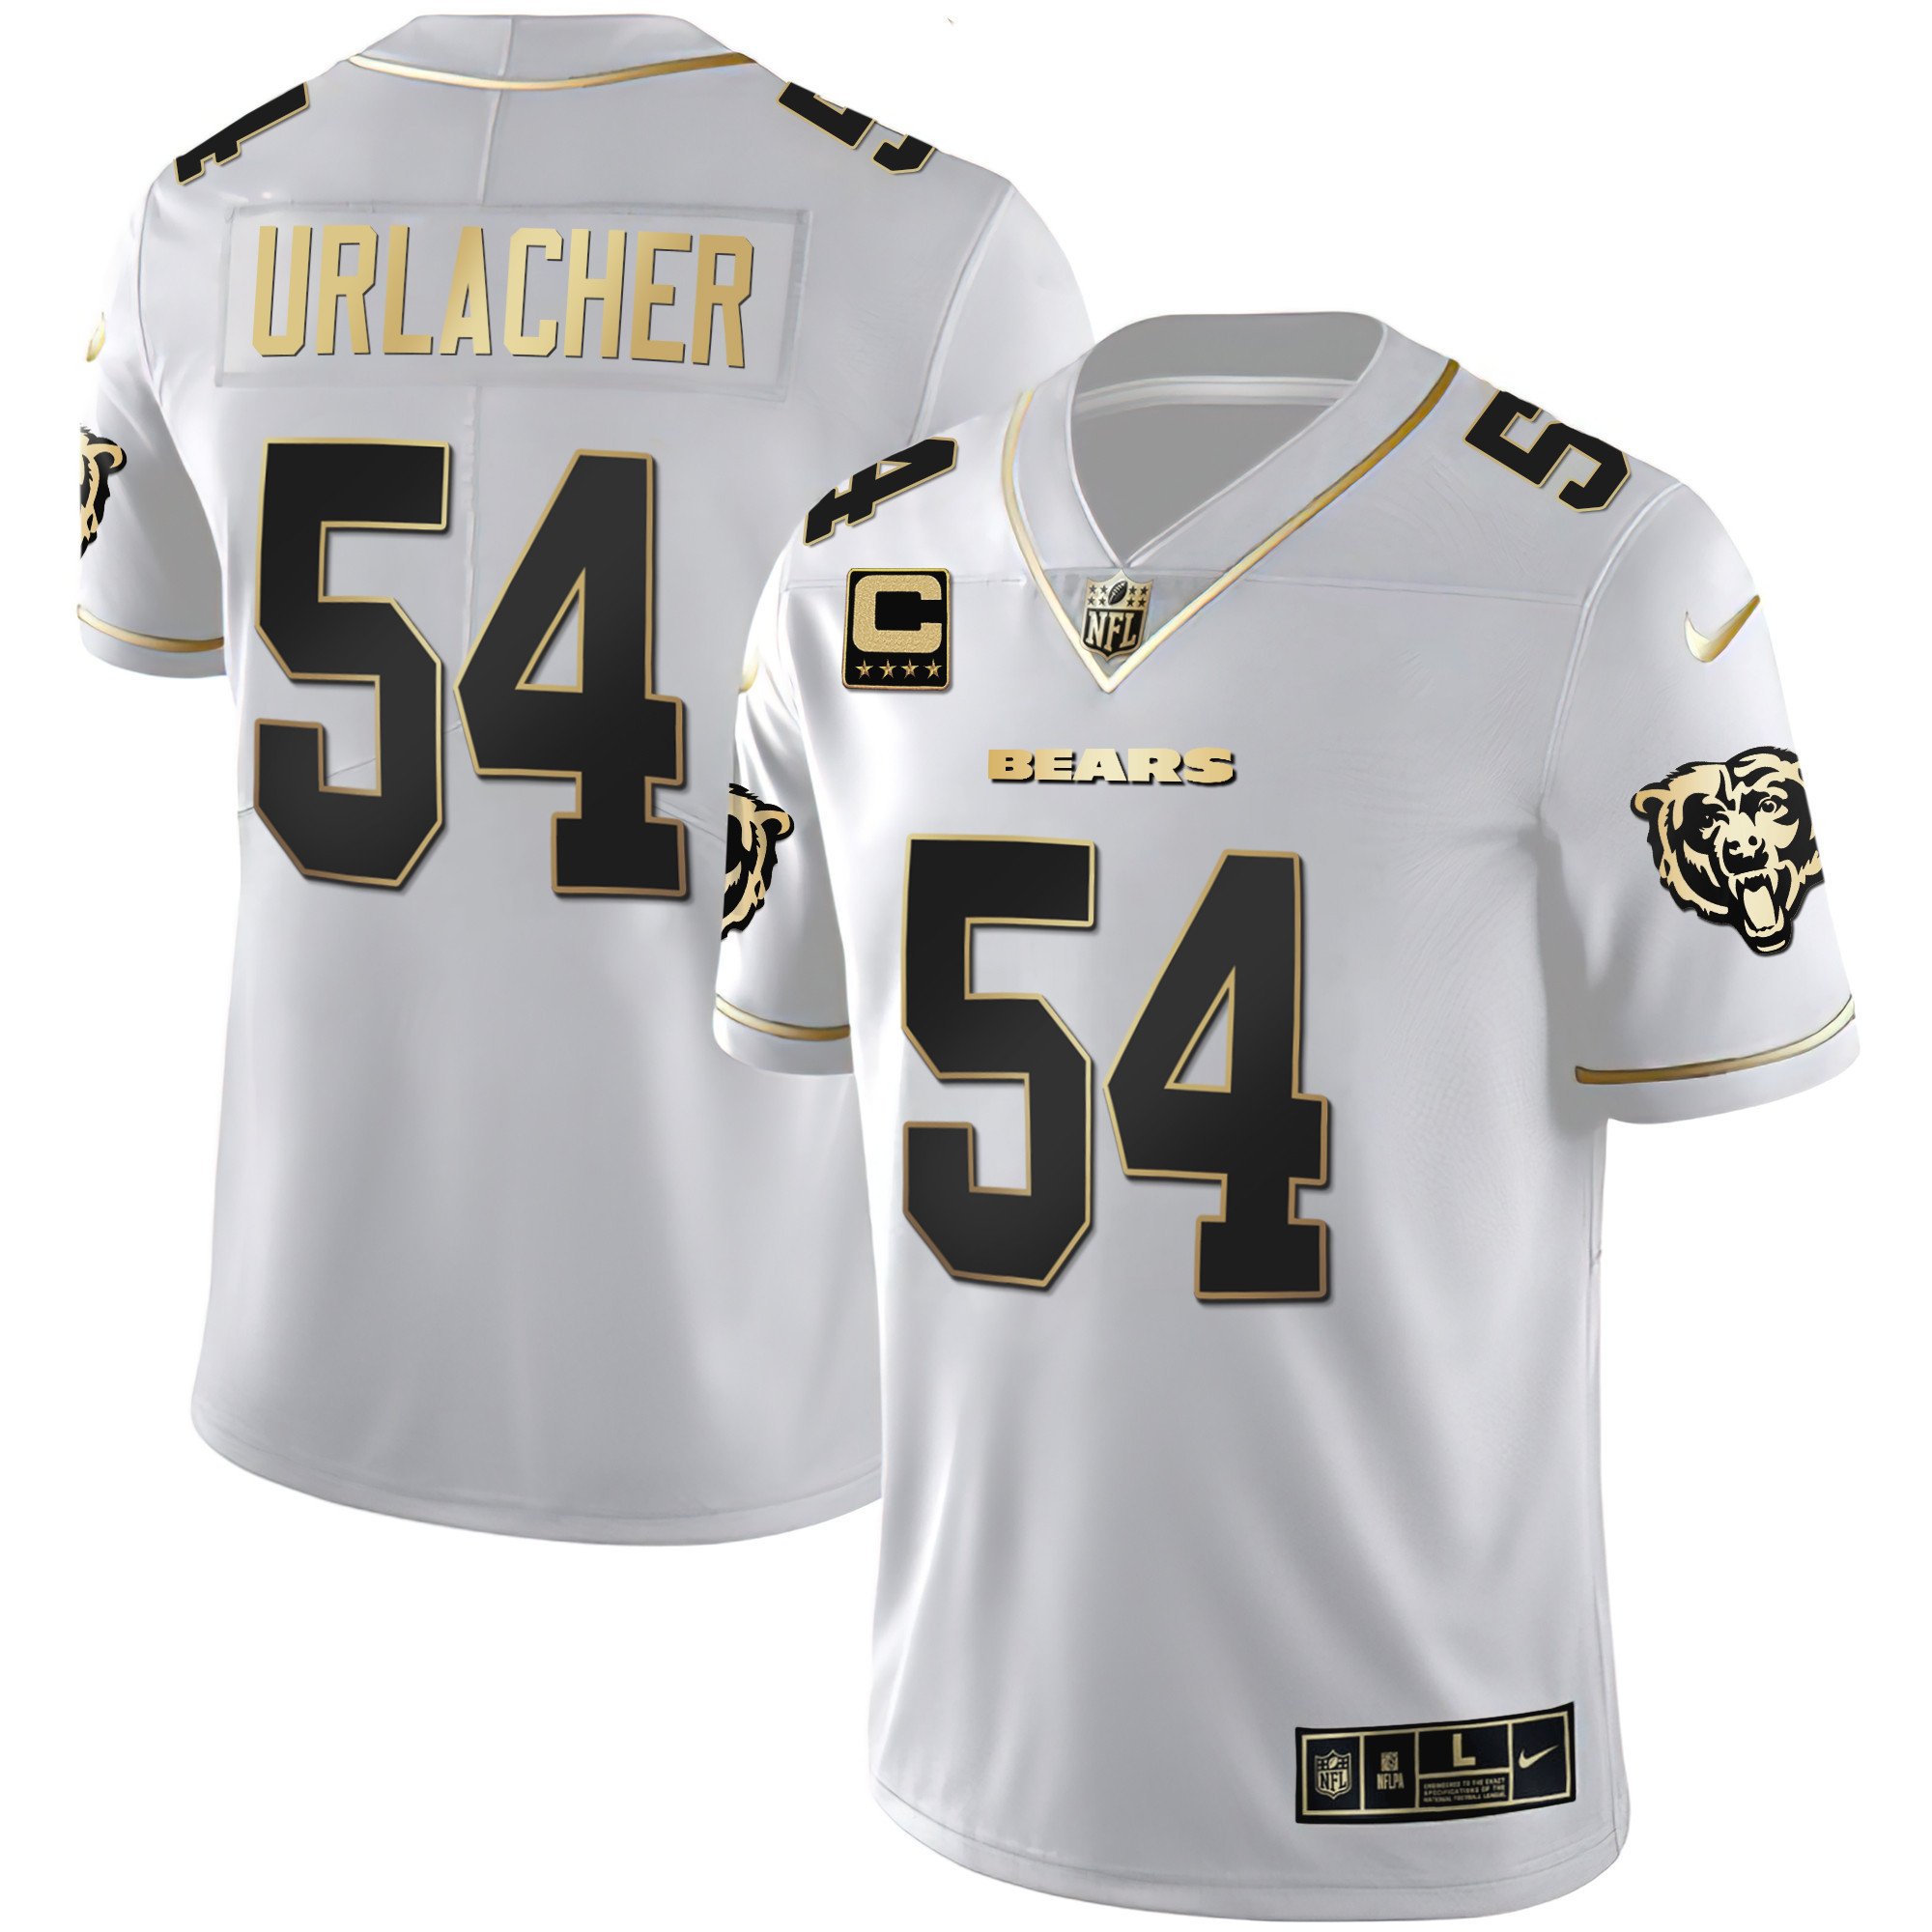 Men's Bears White Gold & Black Gold Jersey - All Stitched - Vgear